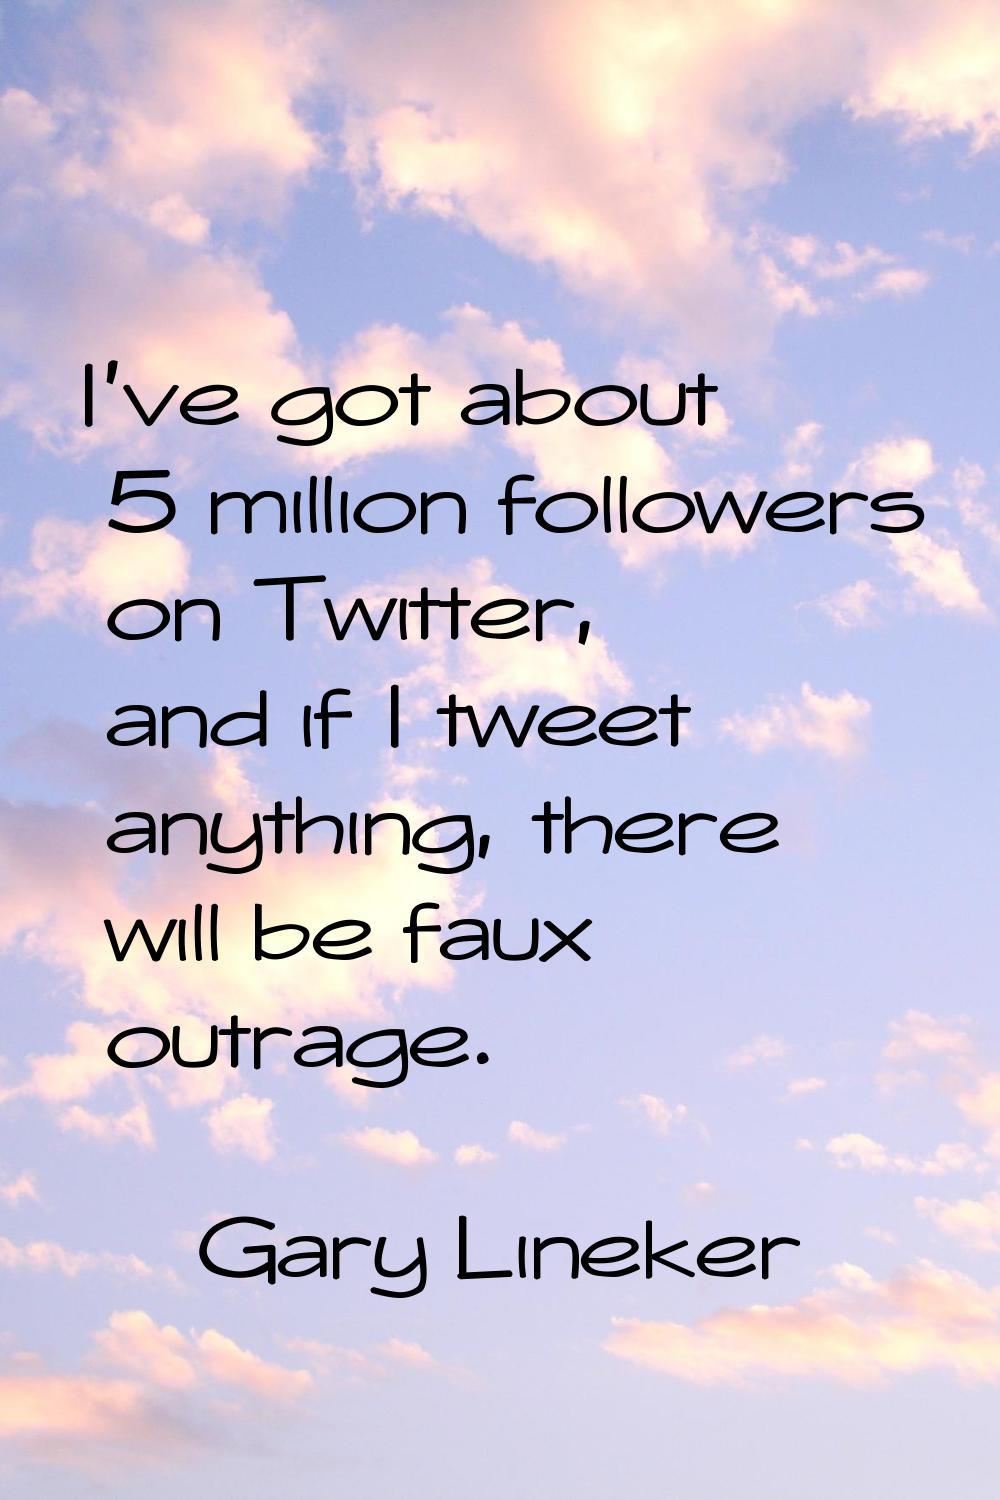 I've got about 5 million followers on Twitter, and if I tweet anything, there will be faux outrage.